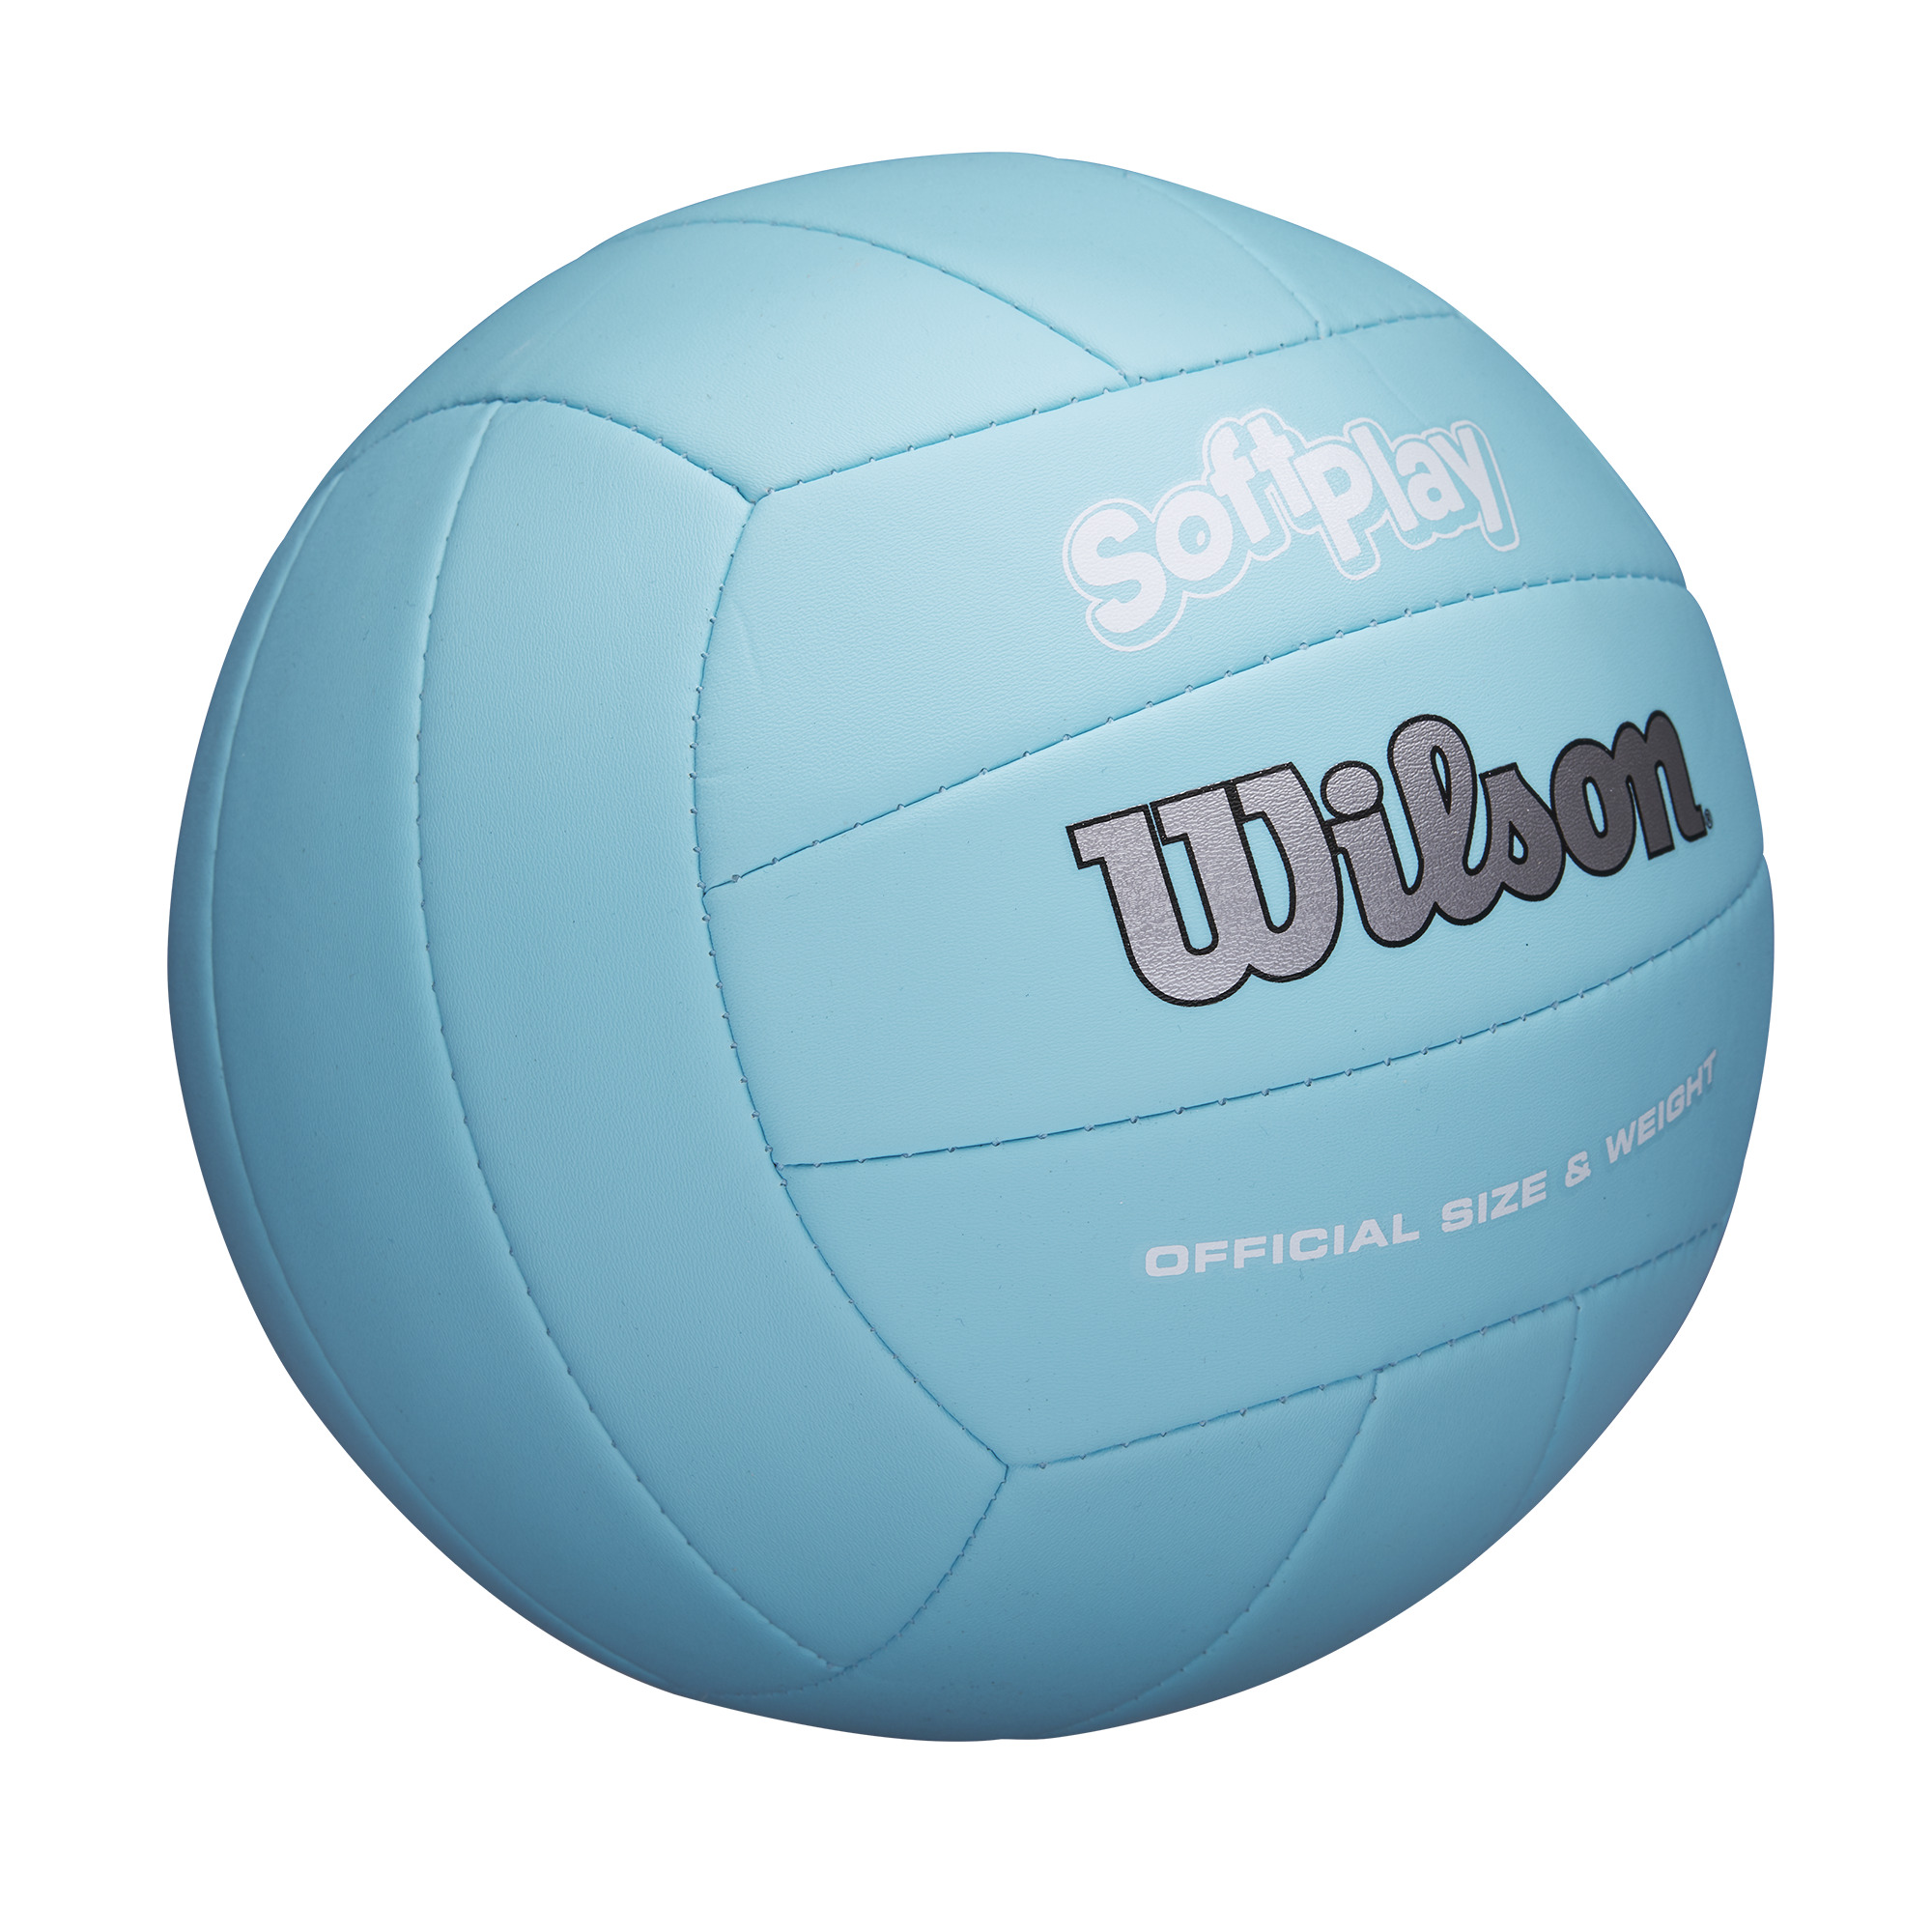 Wilson Soft Play Outdoor Volleyball, Official Size, Blue - image 5 of 7